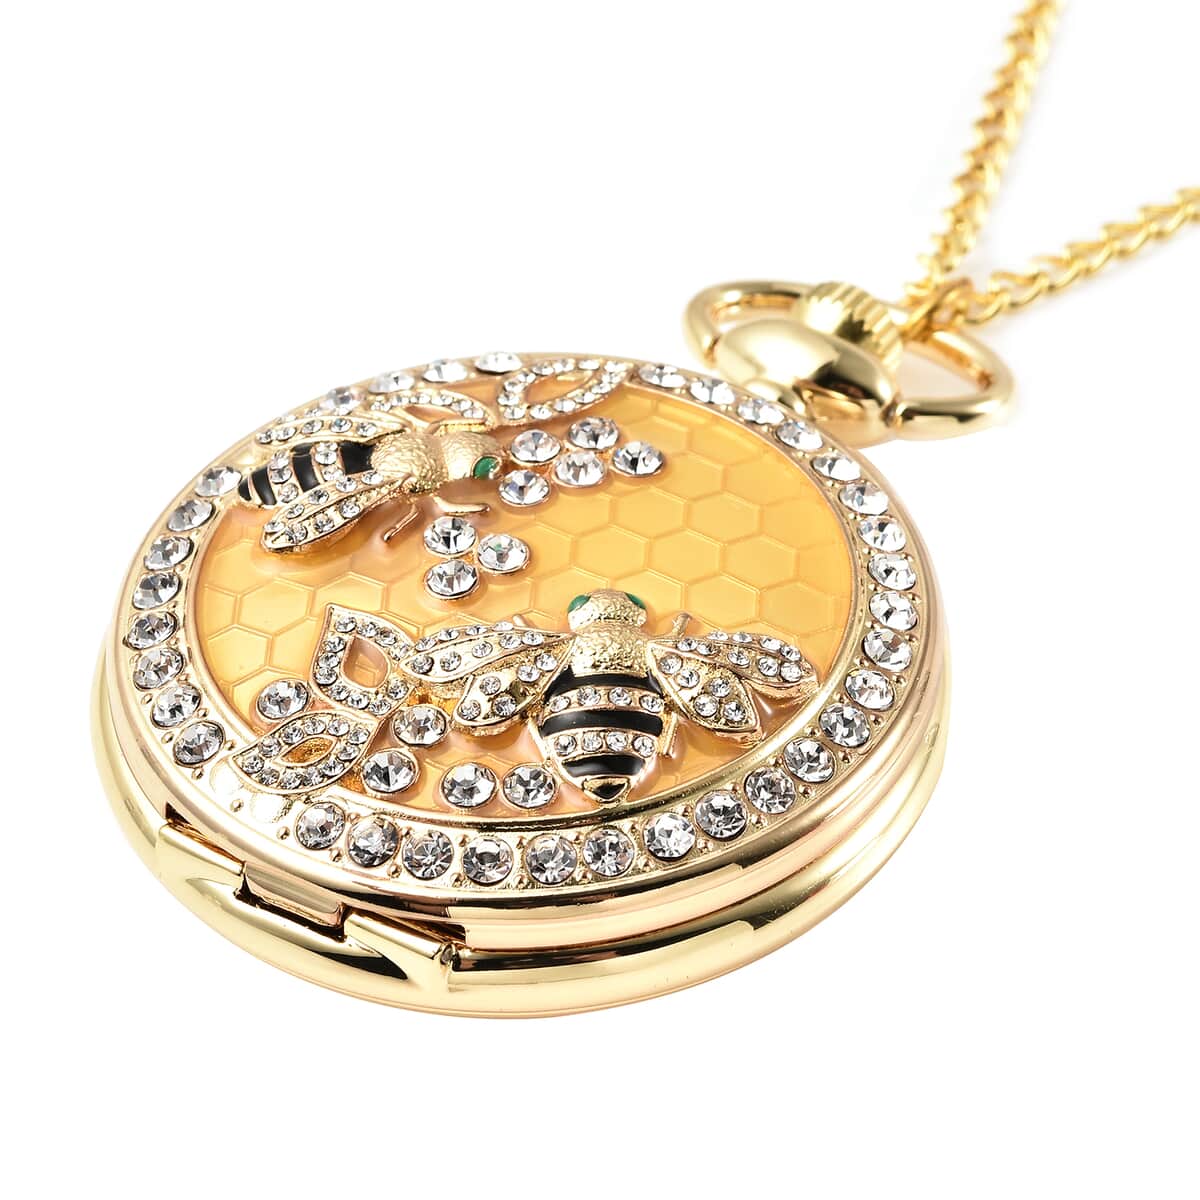 STRADA White Crystal Japanese Movement Carving Bee Pattern Pocket Watch with Chain in Goldtone (31 Inches) image number 2